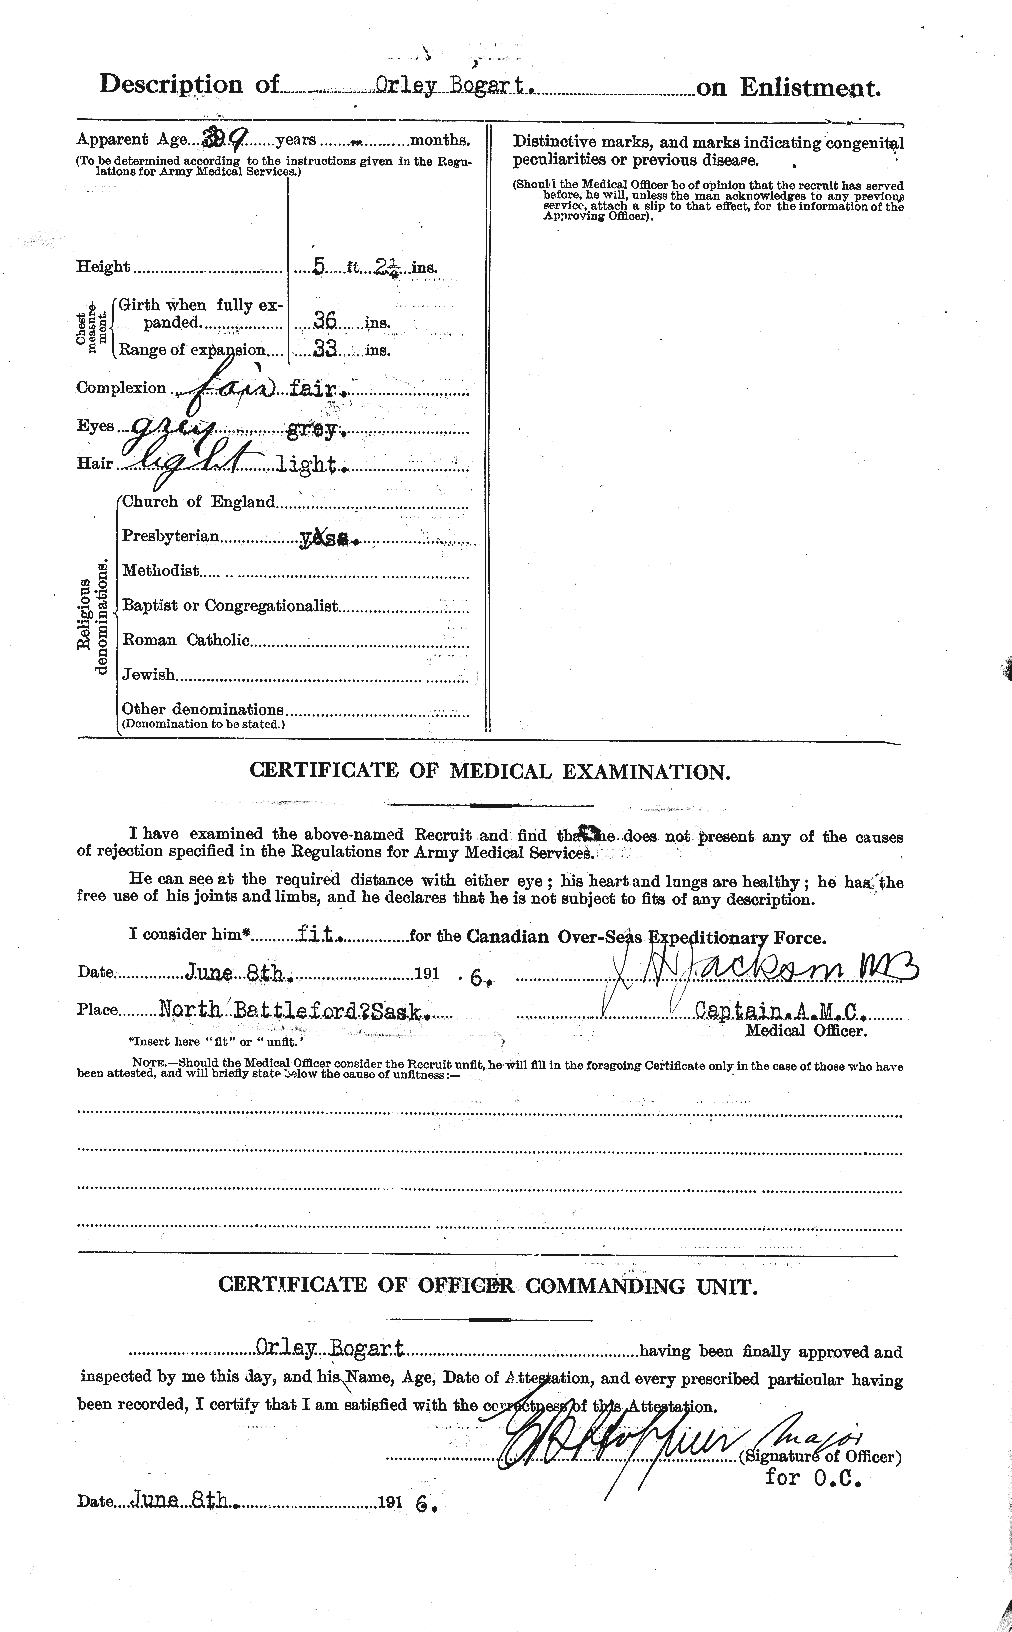 Personnel Records of the First World War - CEF 249209b